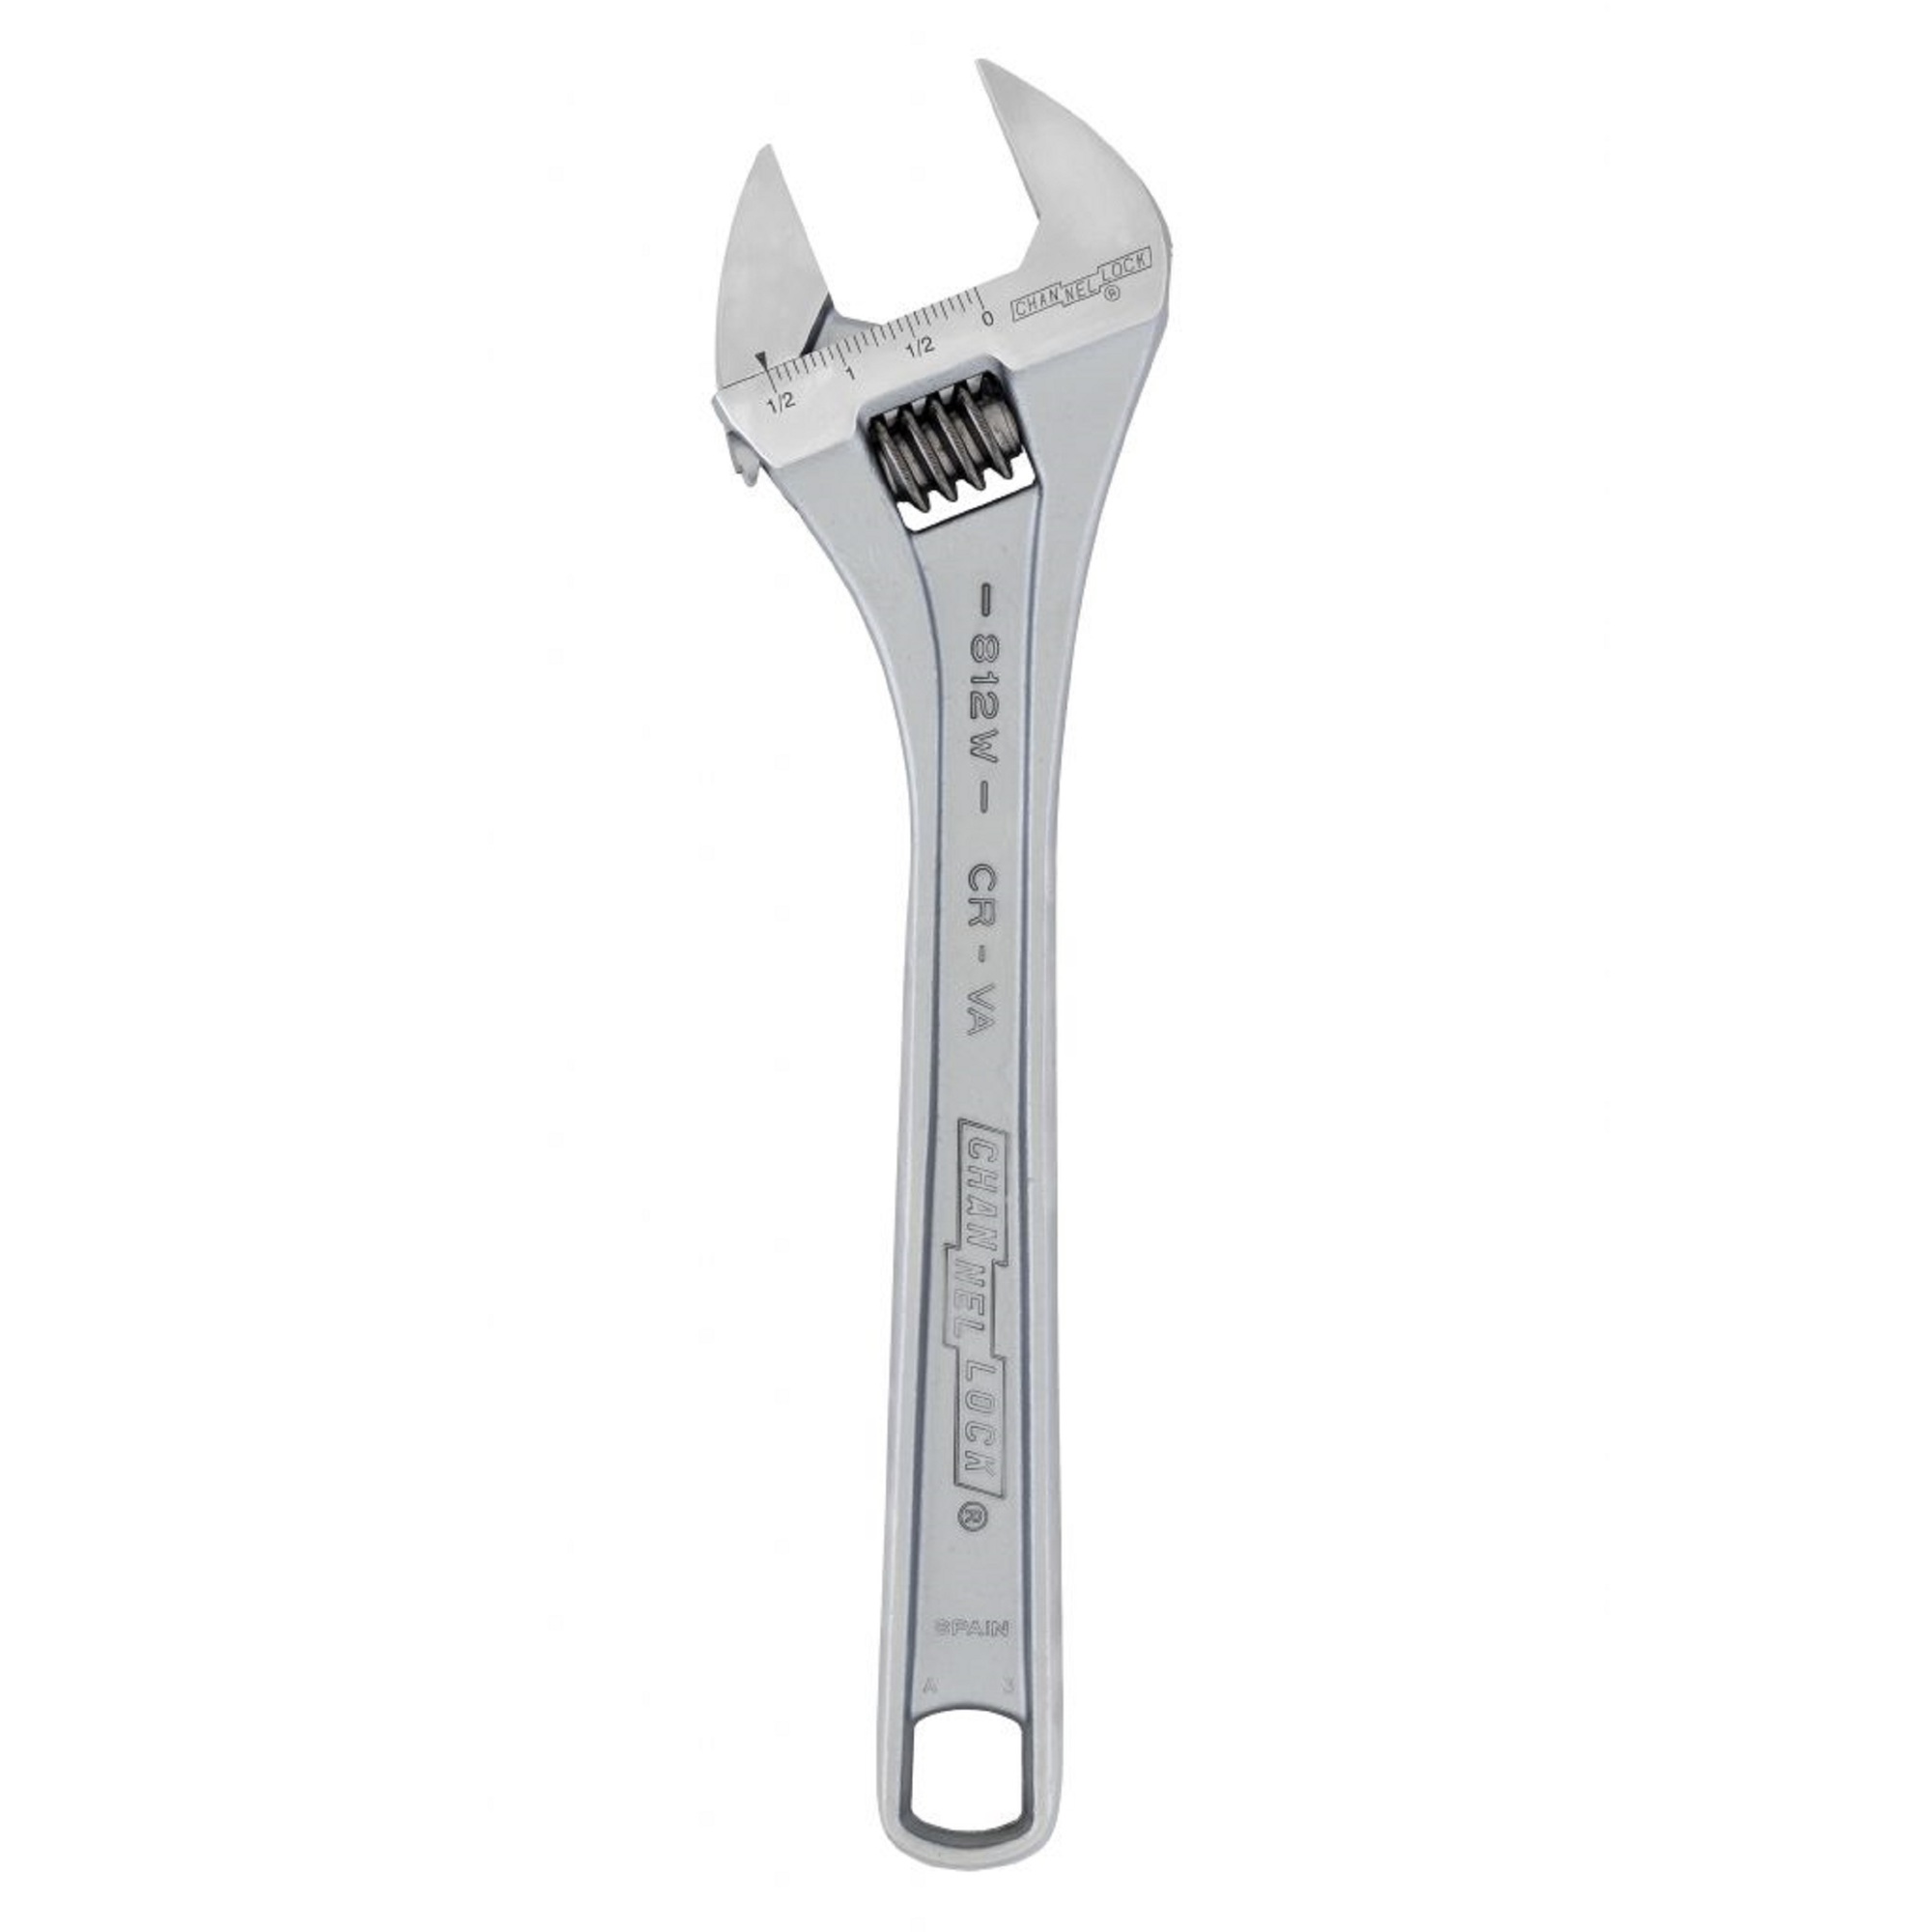 12Inch Chrome/Nickel Finish Steel Adjustable Wrench, Pieces (qty.) 1, Tool Length 12 in, Measurement Standard Standard (SAE), Model - Channellock 812W